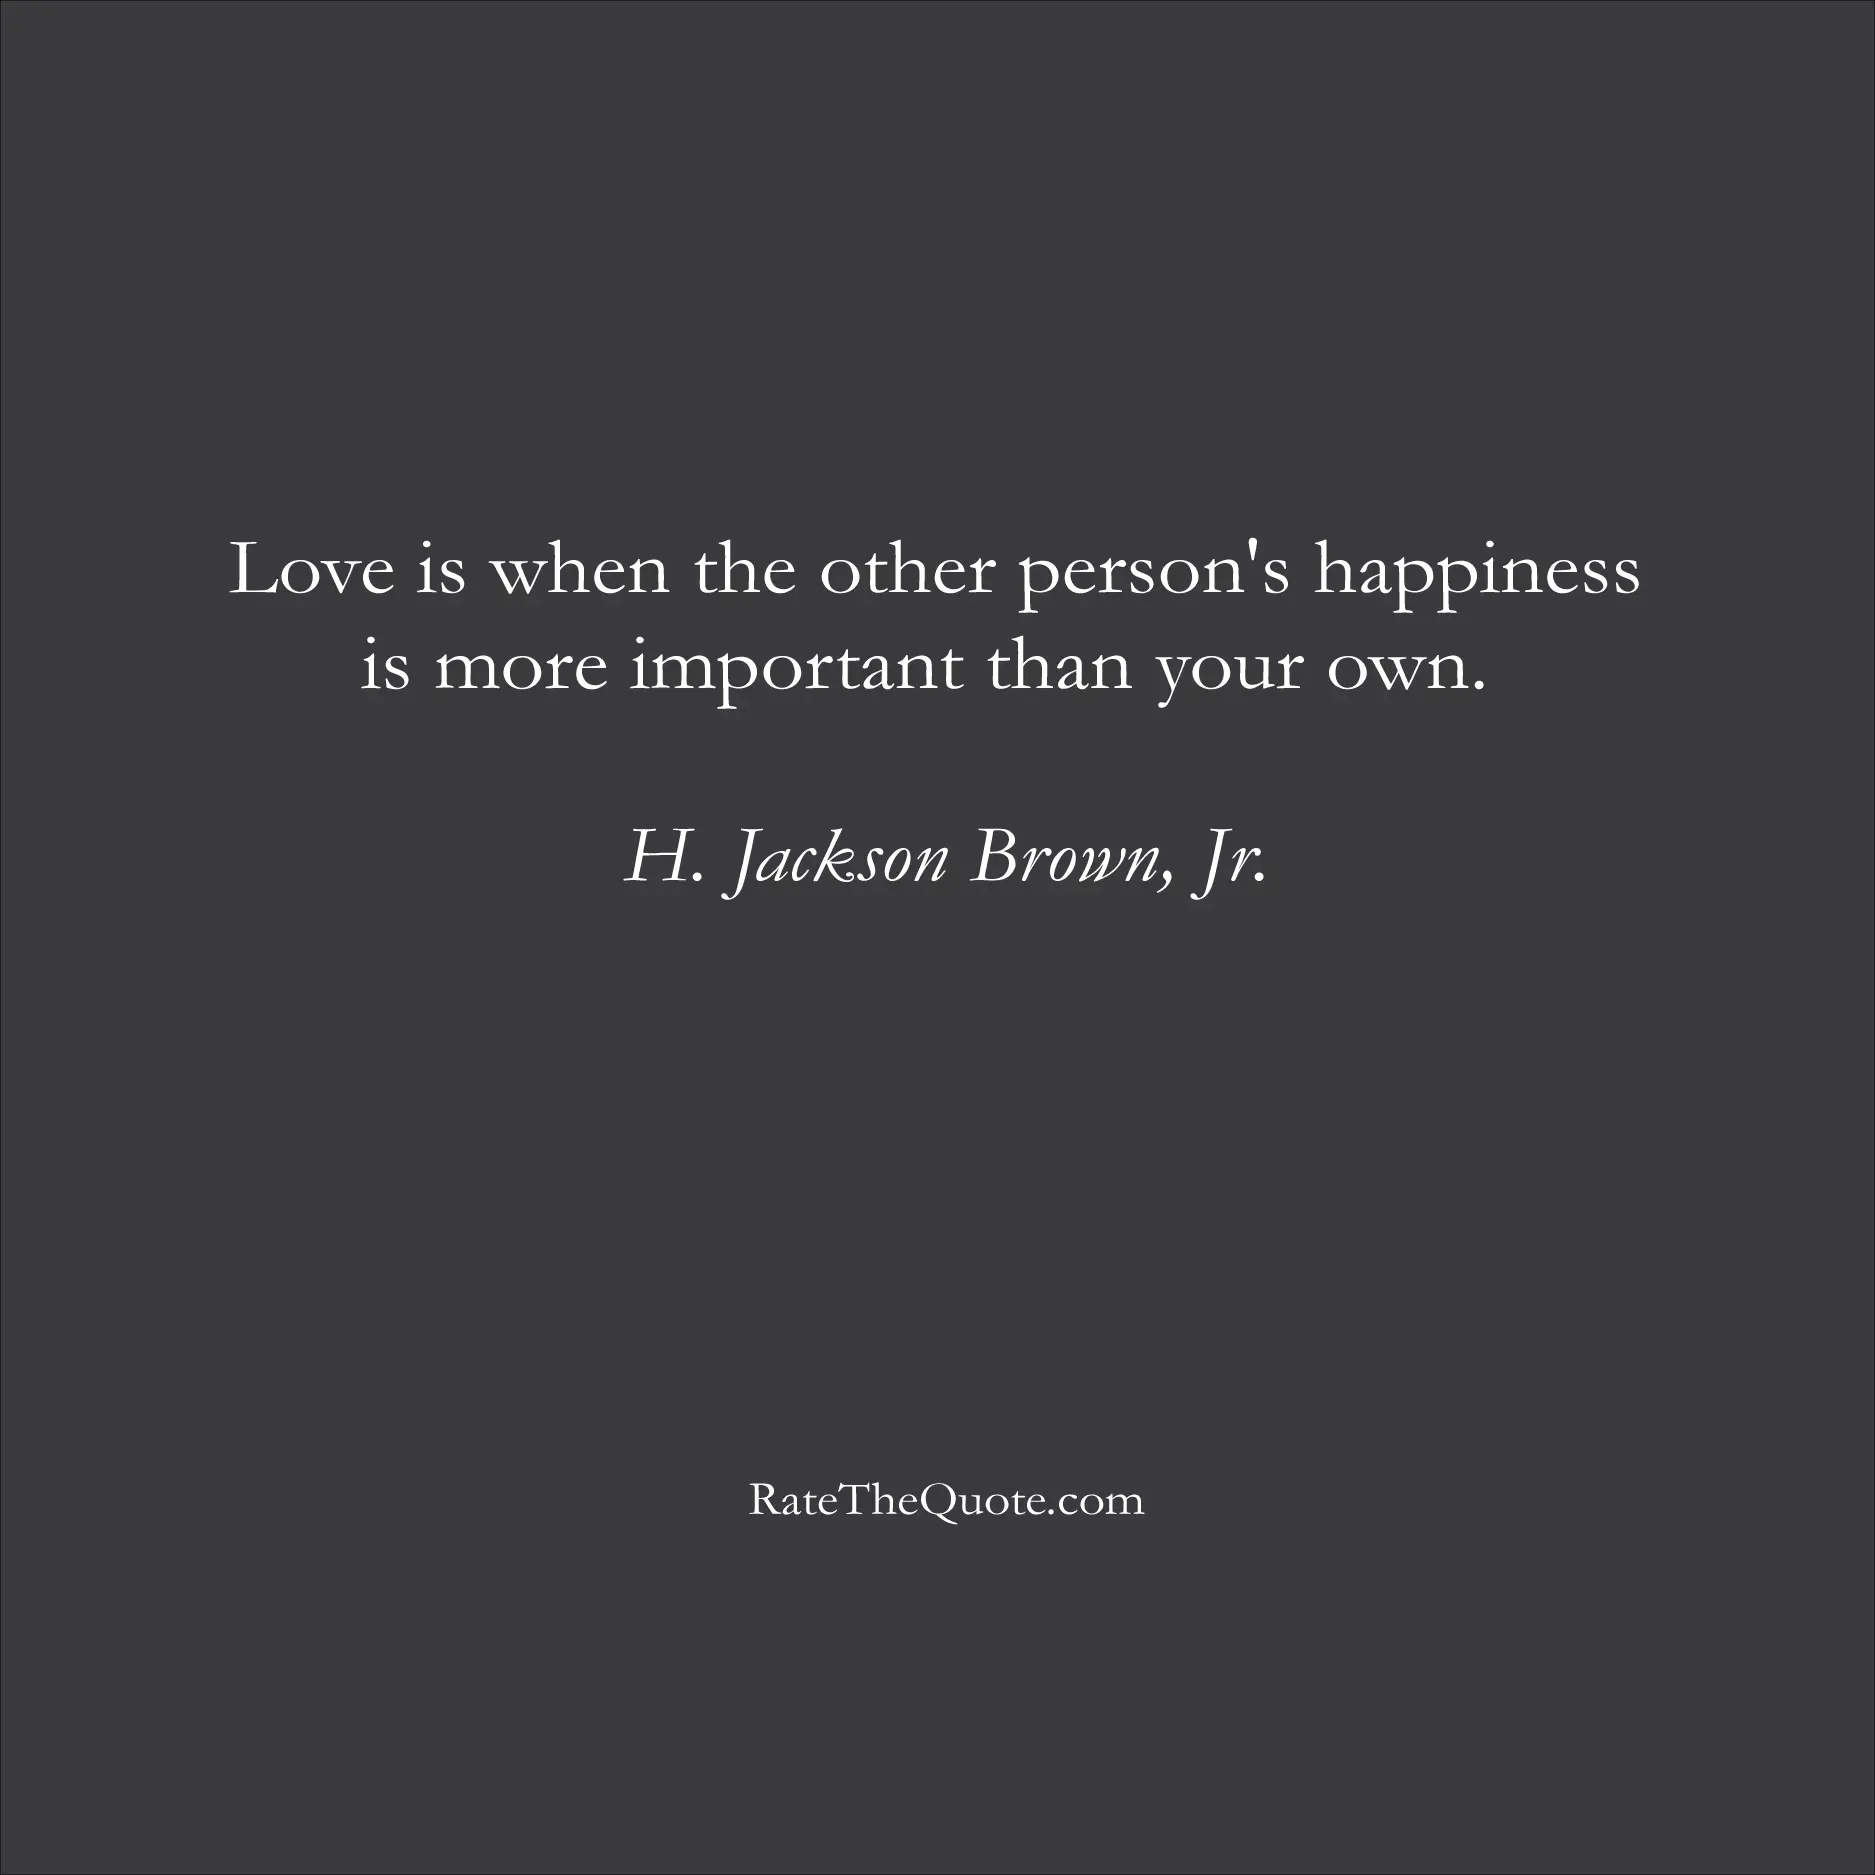 Love Quotes Love is when the other person's happiness is more important than your own. H. Jackson Brown, Jr.